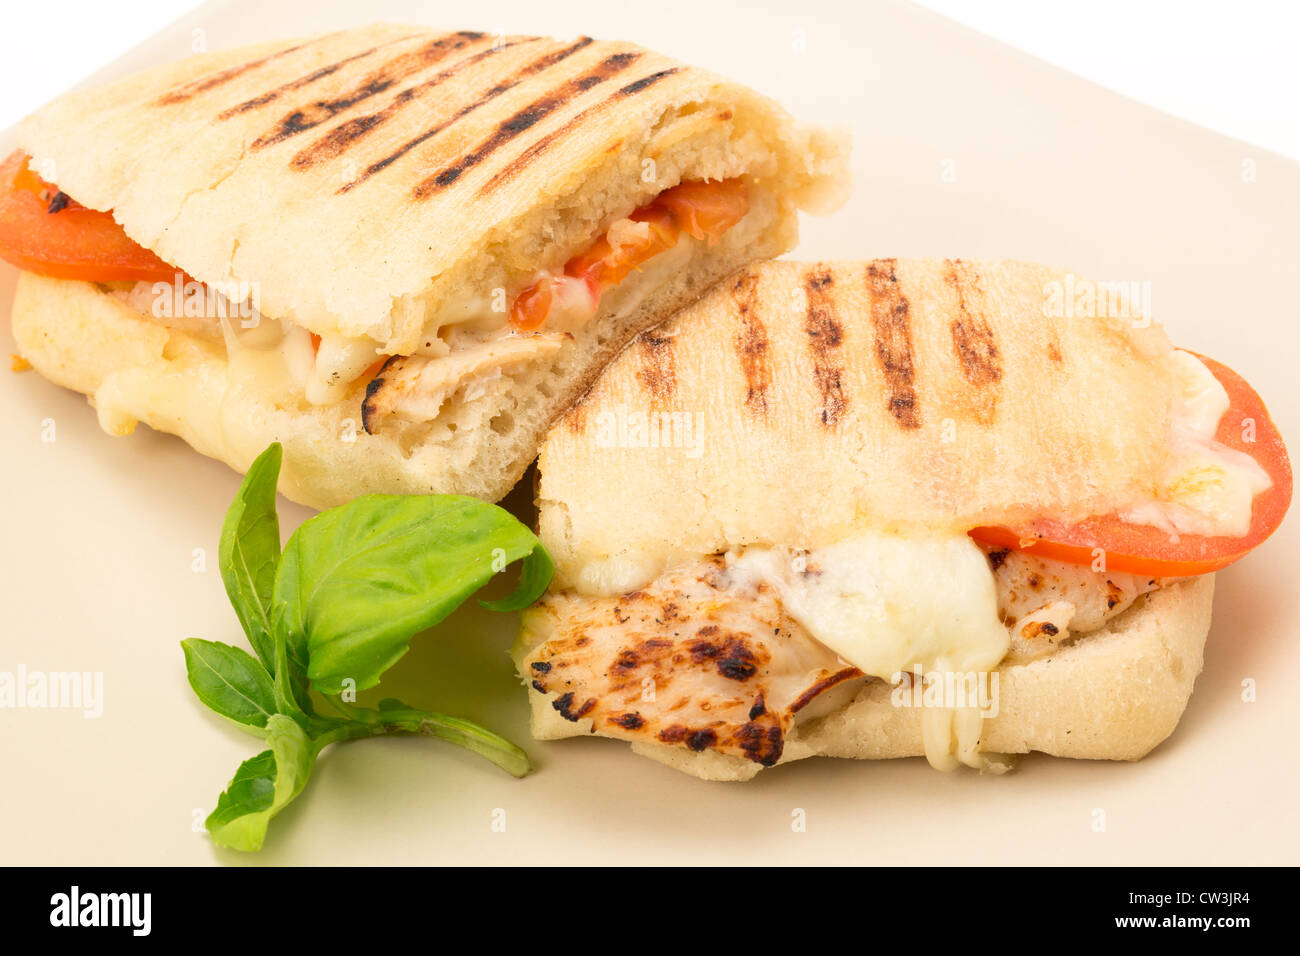 Toasted Chicken, tomato and mozzarella Panini sandwich that has been cut in half and placed on a plate - studio shot Stock Photo